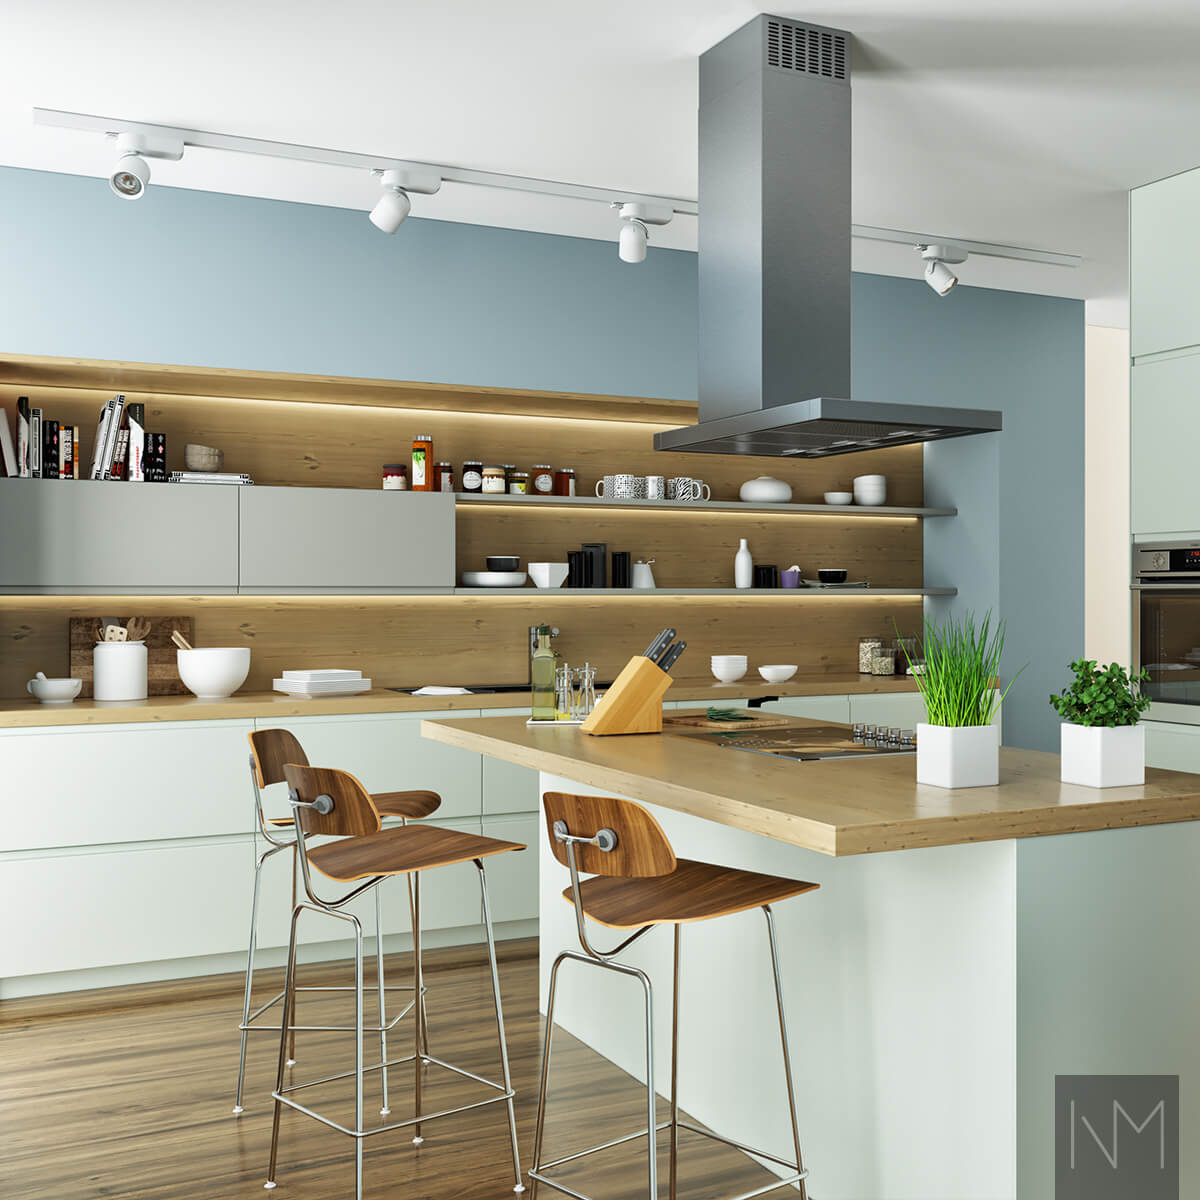 IKEA Metod or Faktum kitchen Instyle. Colour NCS 1706-G15Y or Jotun Soft Mint 7555